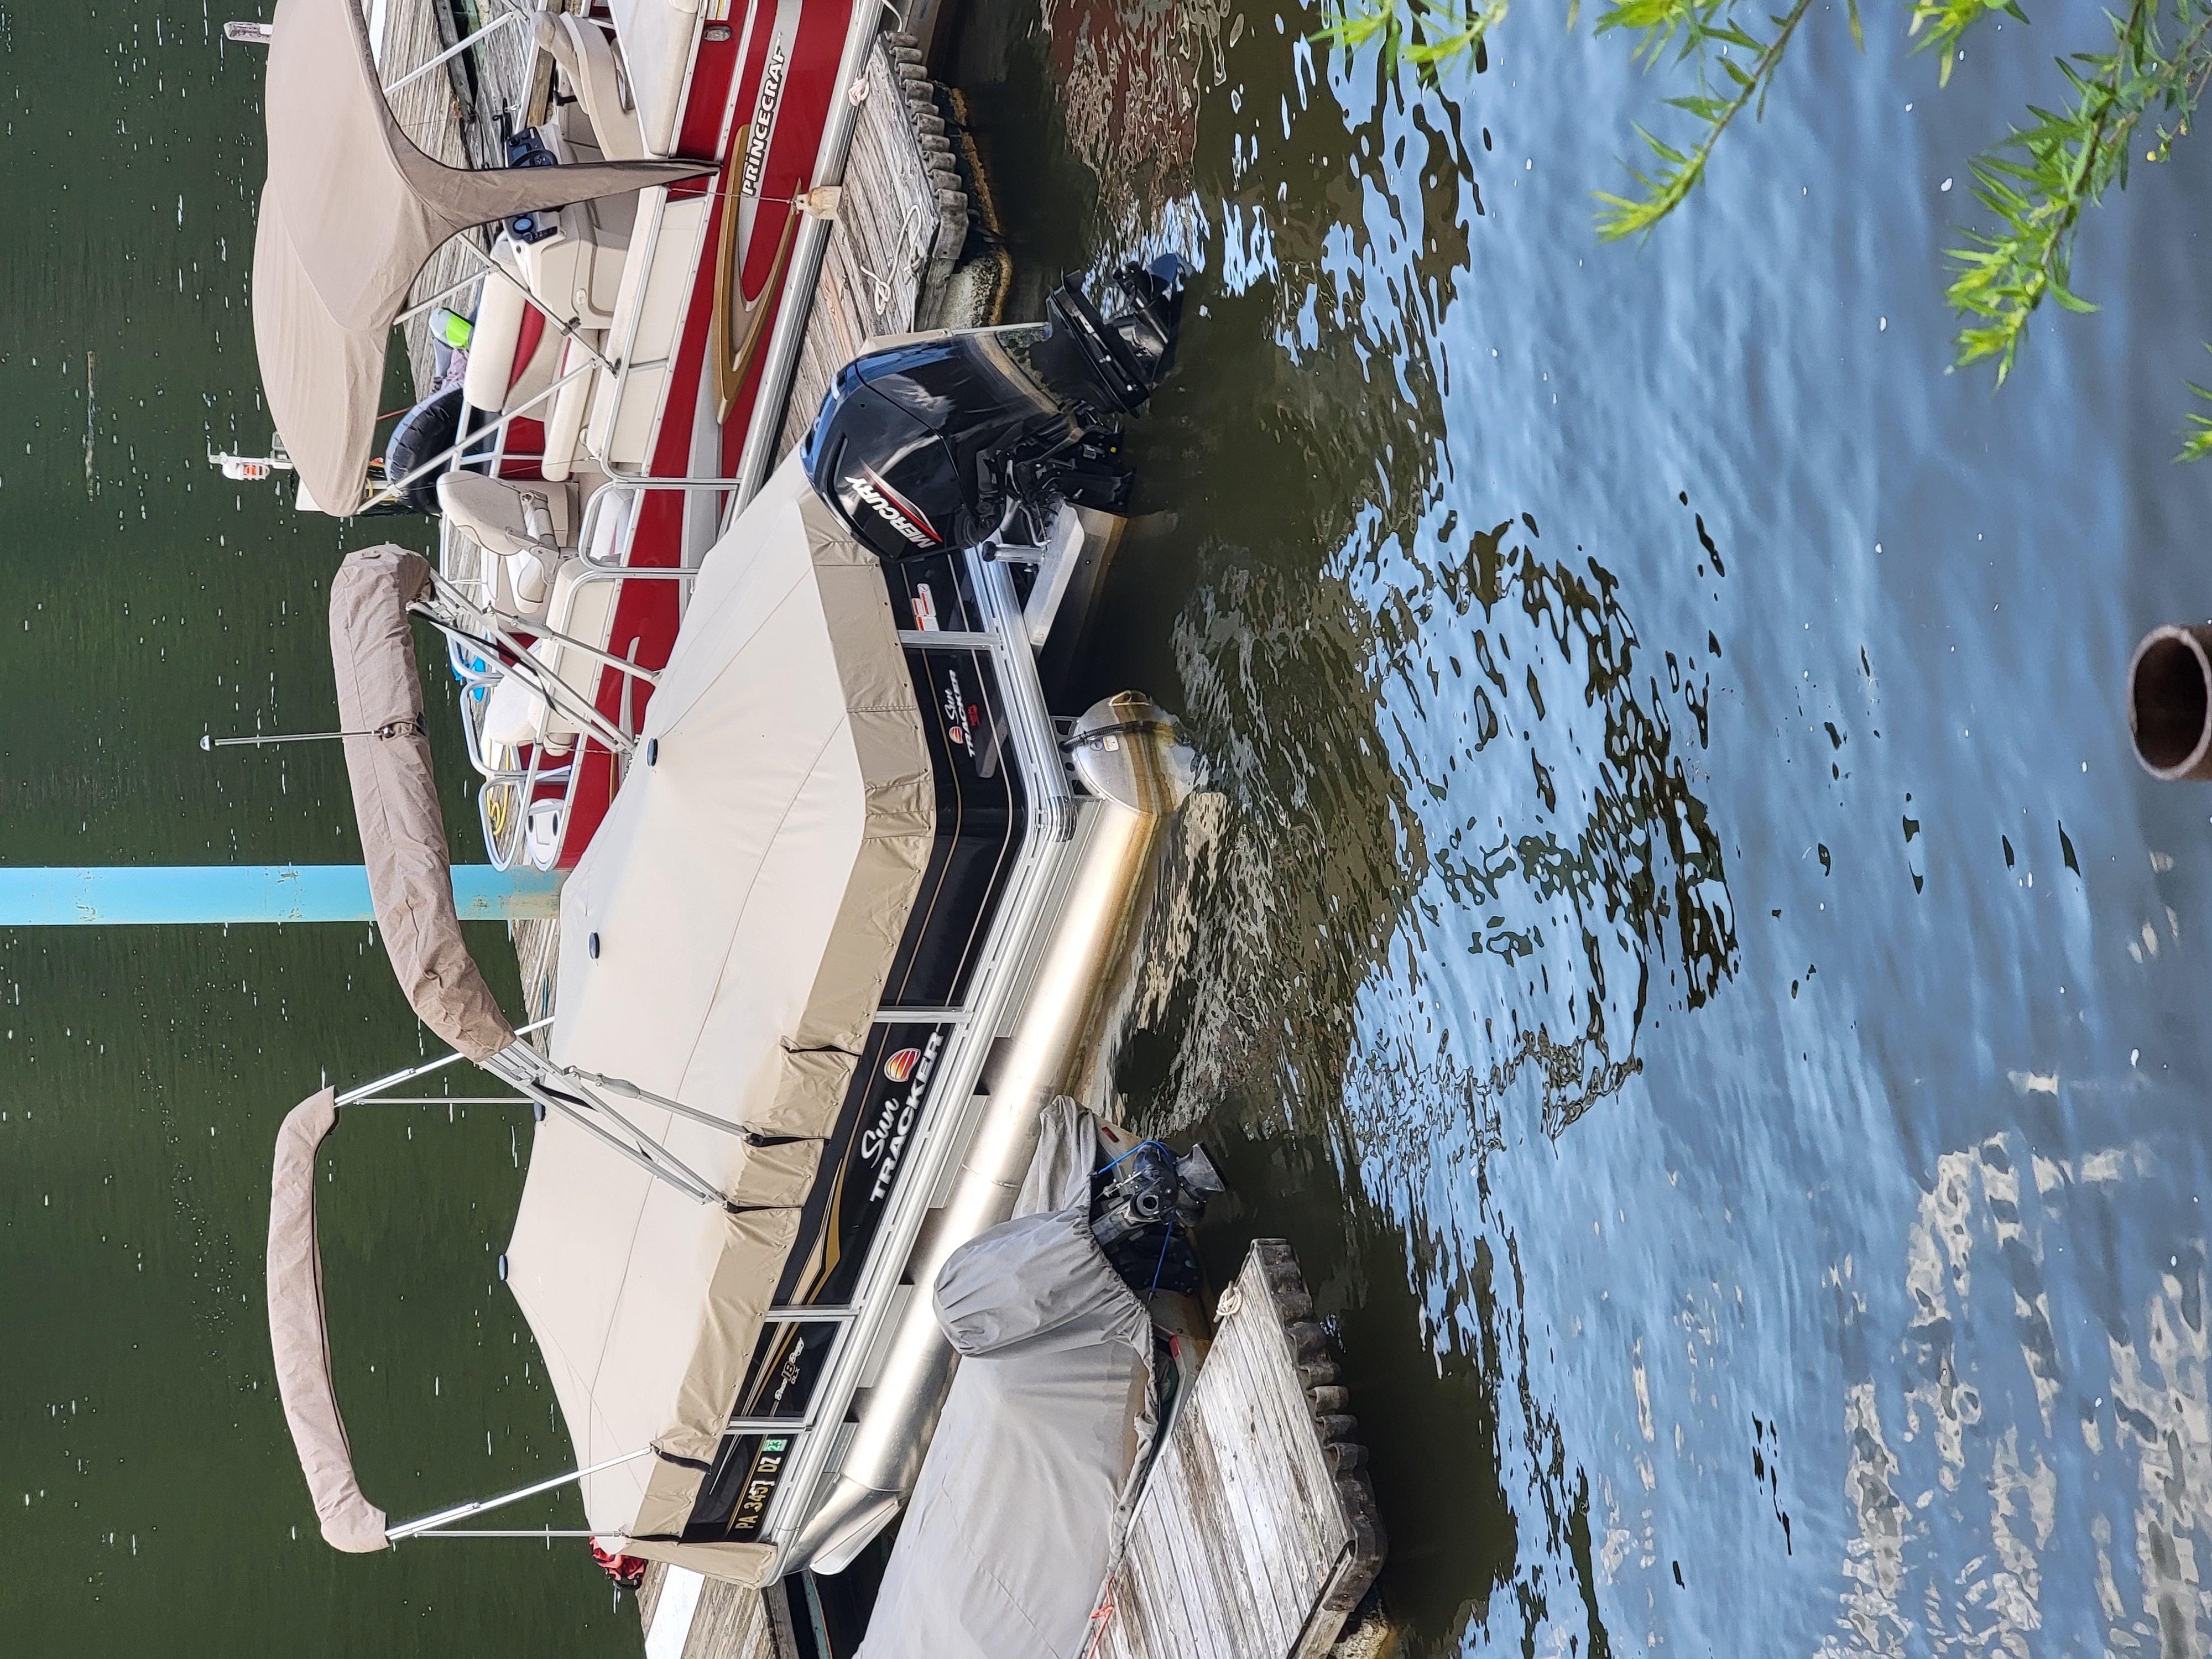 2021 18 foot Sun Tracker Bass Buggy DLX Pontoon Boat for sale in Penn Hills, PA - image 2 